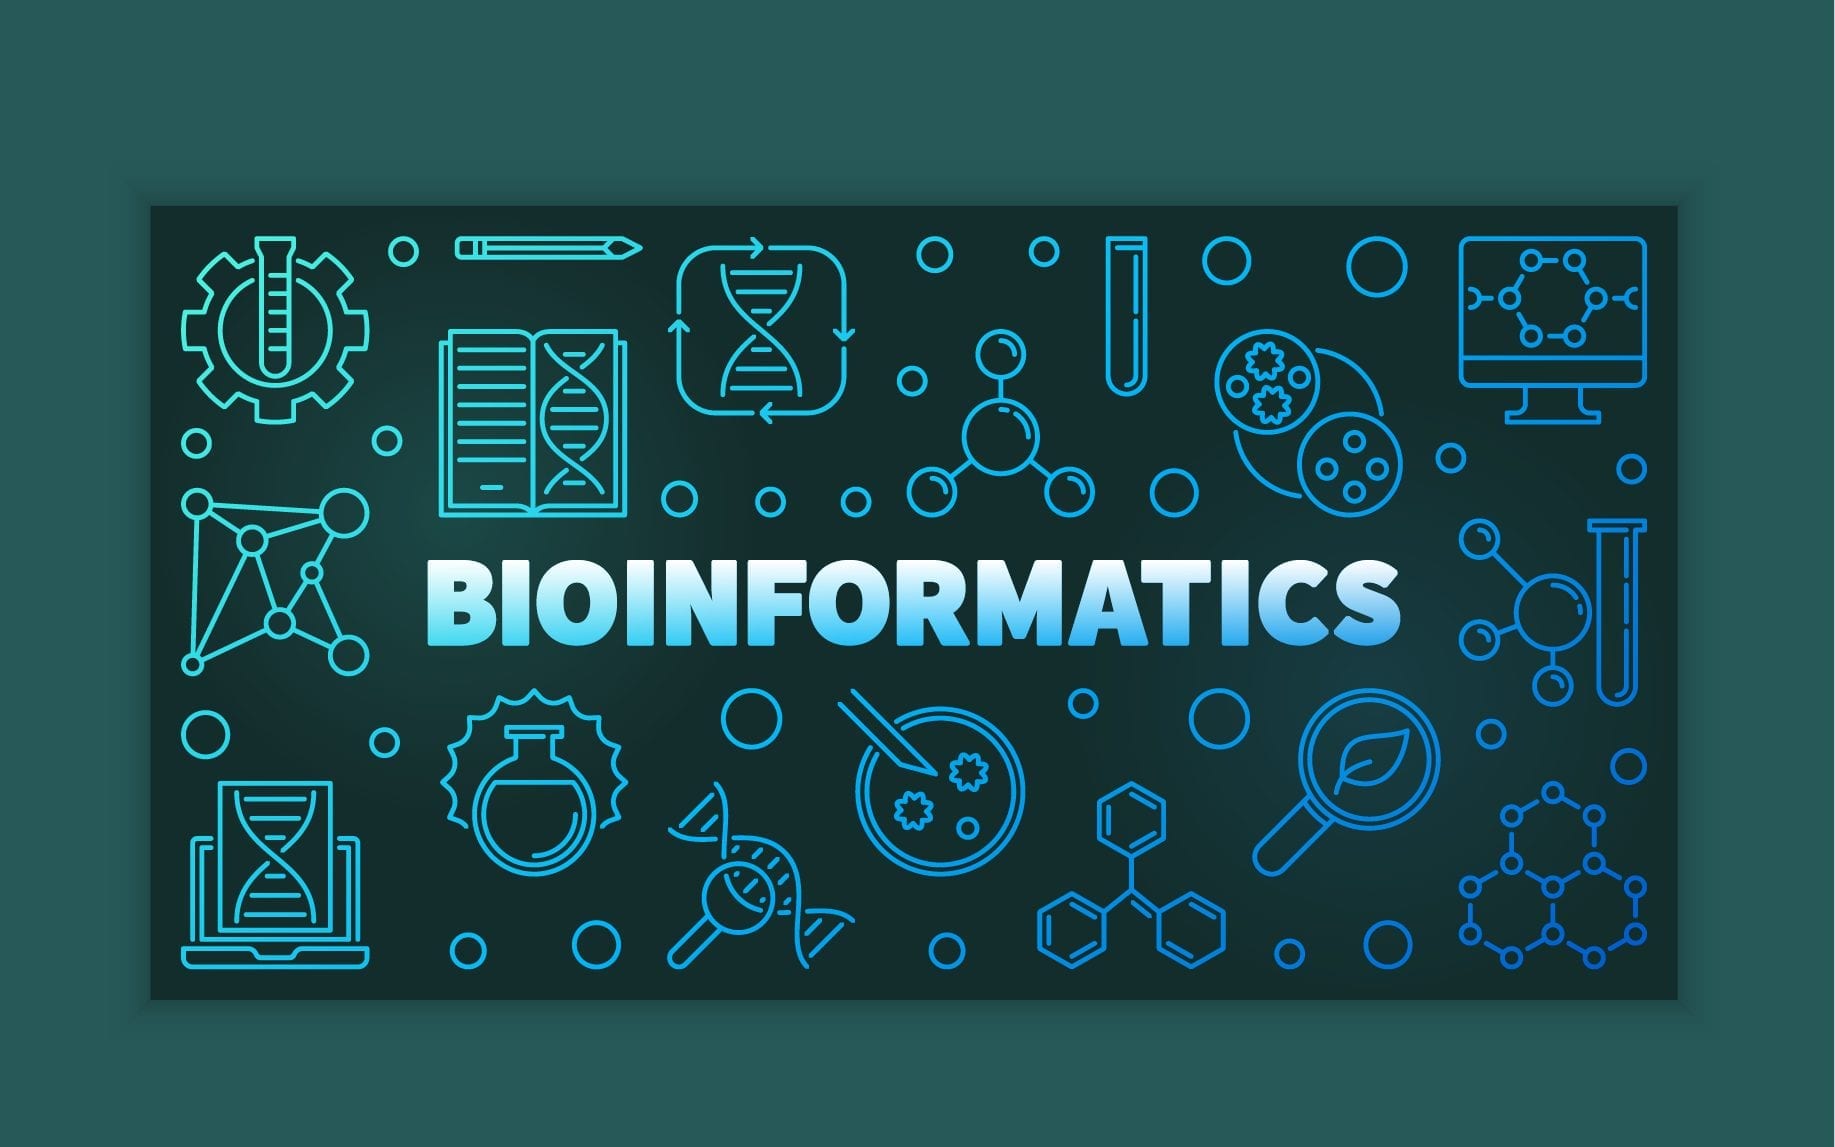 Approaches in Bioinformatics for Analysis and Understanding